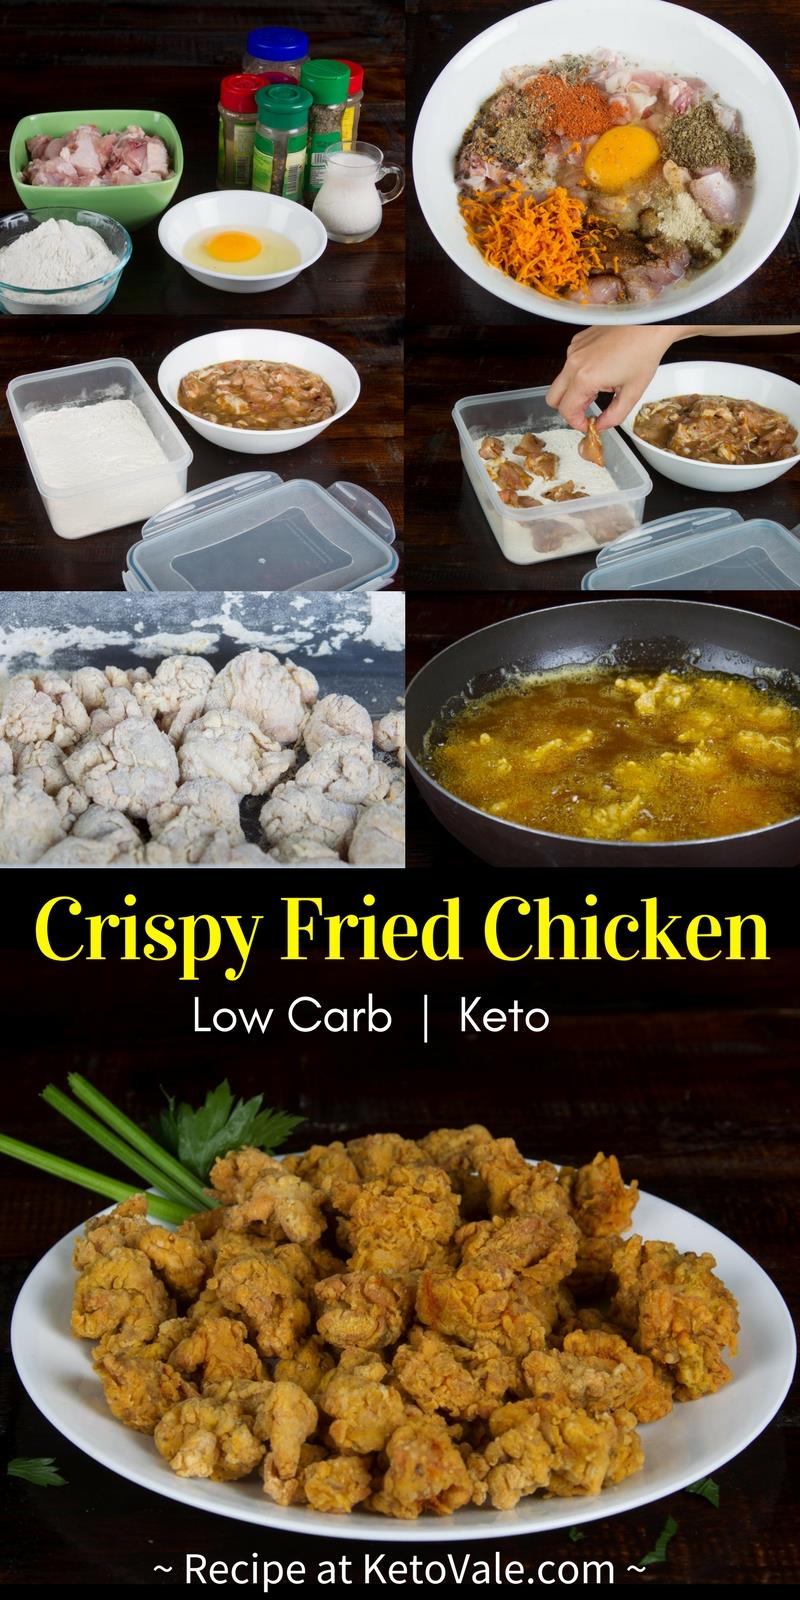 Low Carb Fried Chicken